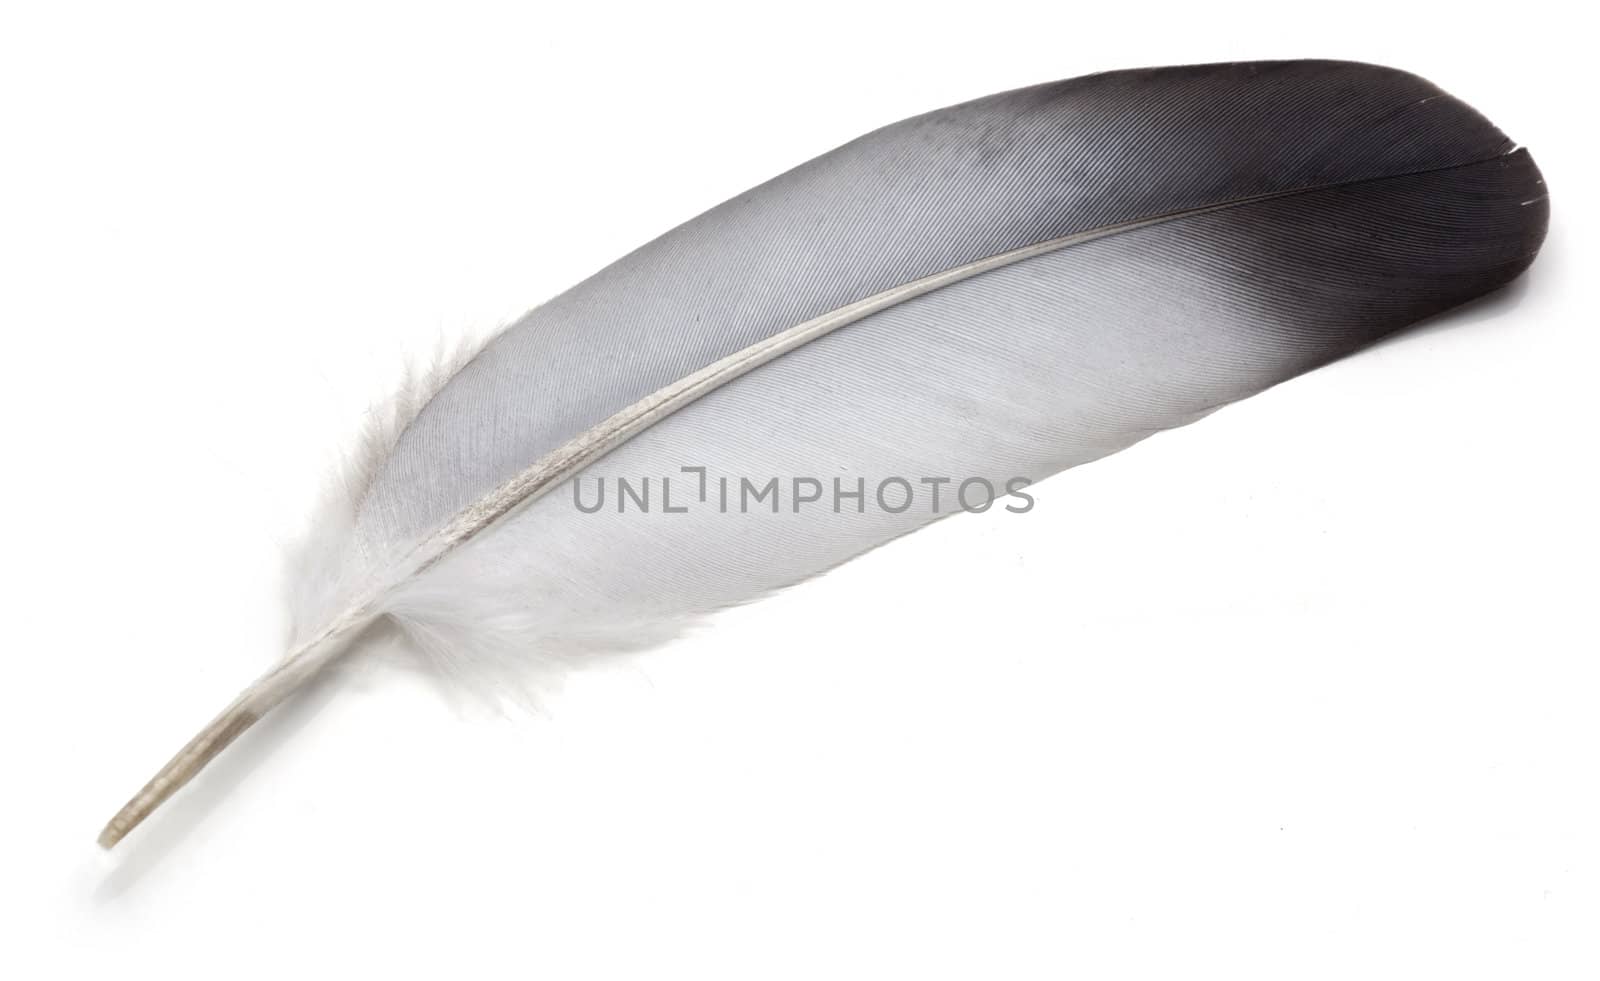 Grey Feather of pigeon over white background.